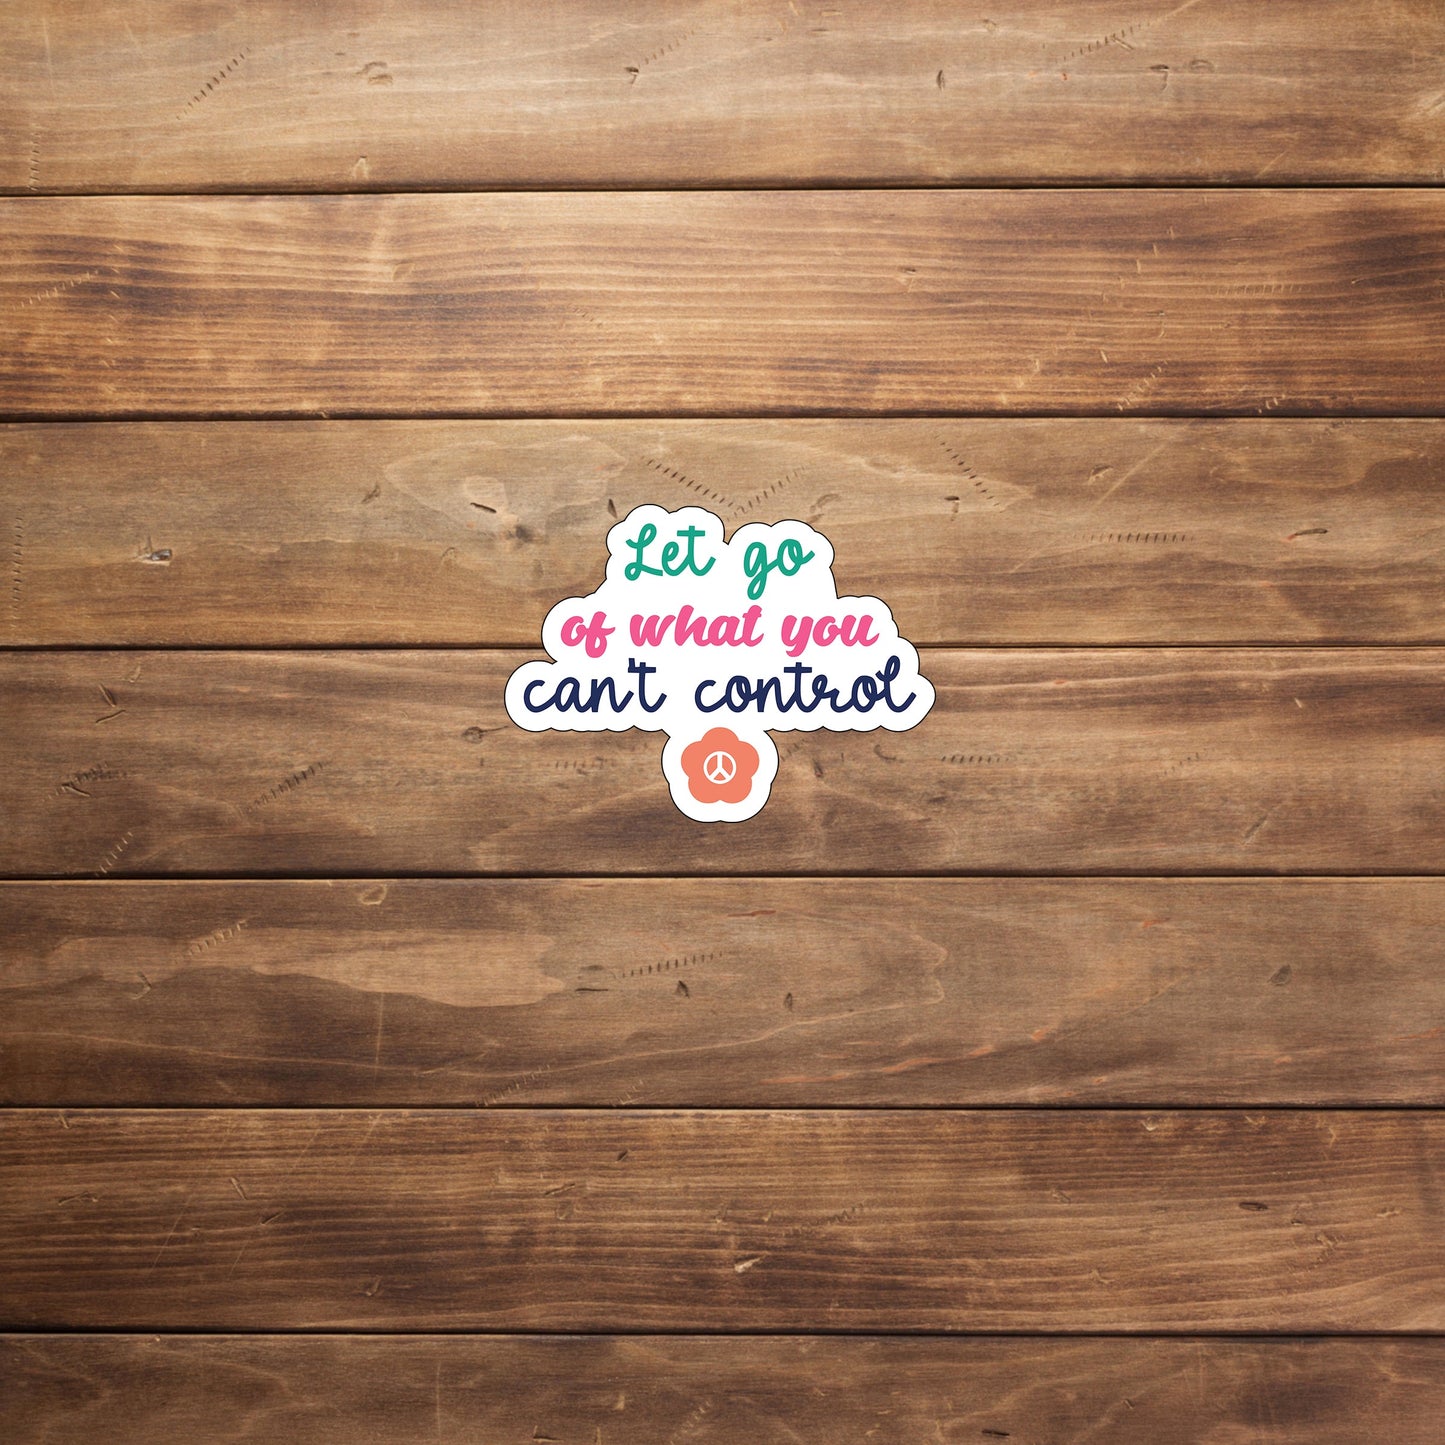 Let go of what you can't control  Sticker,  Vinyl sticker, laptop sticker, Tablet sticker